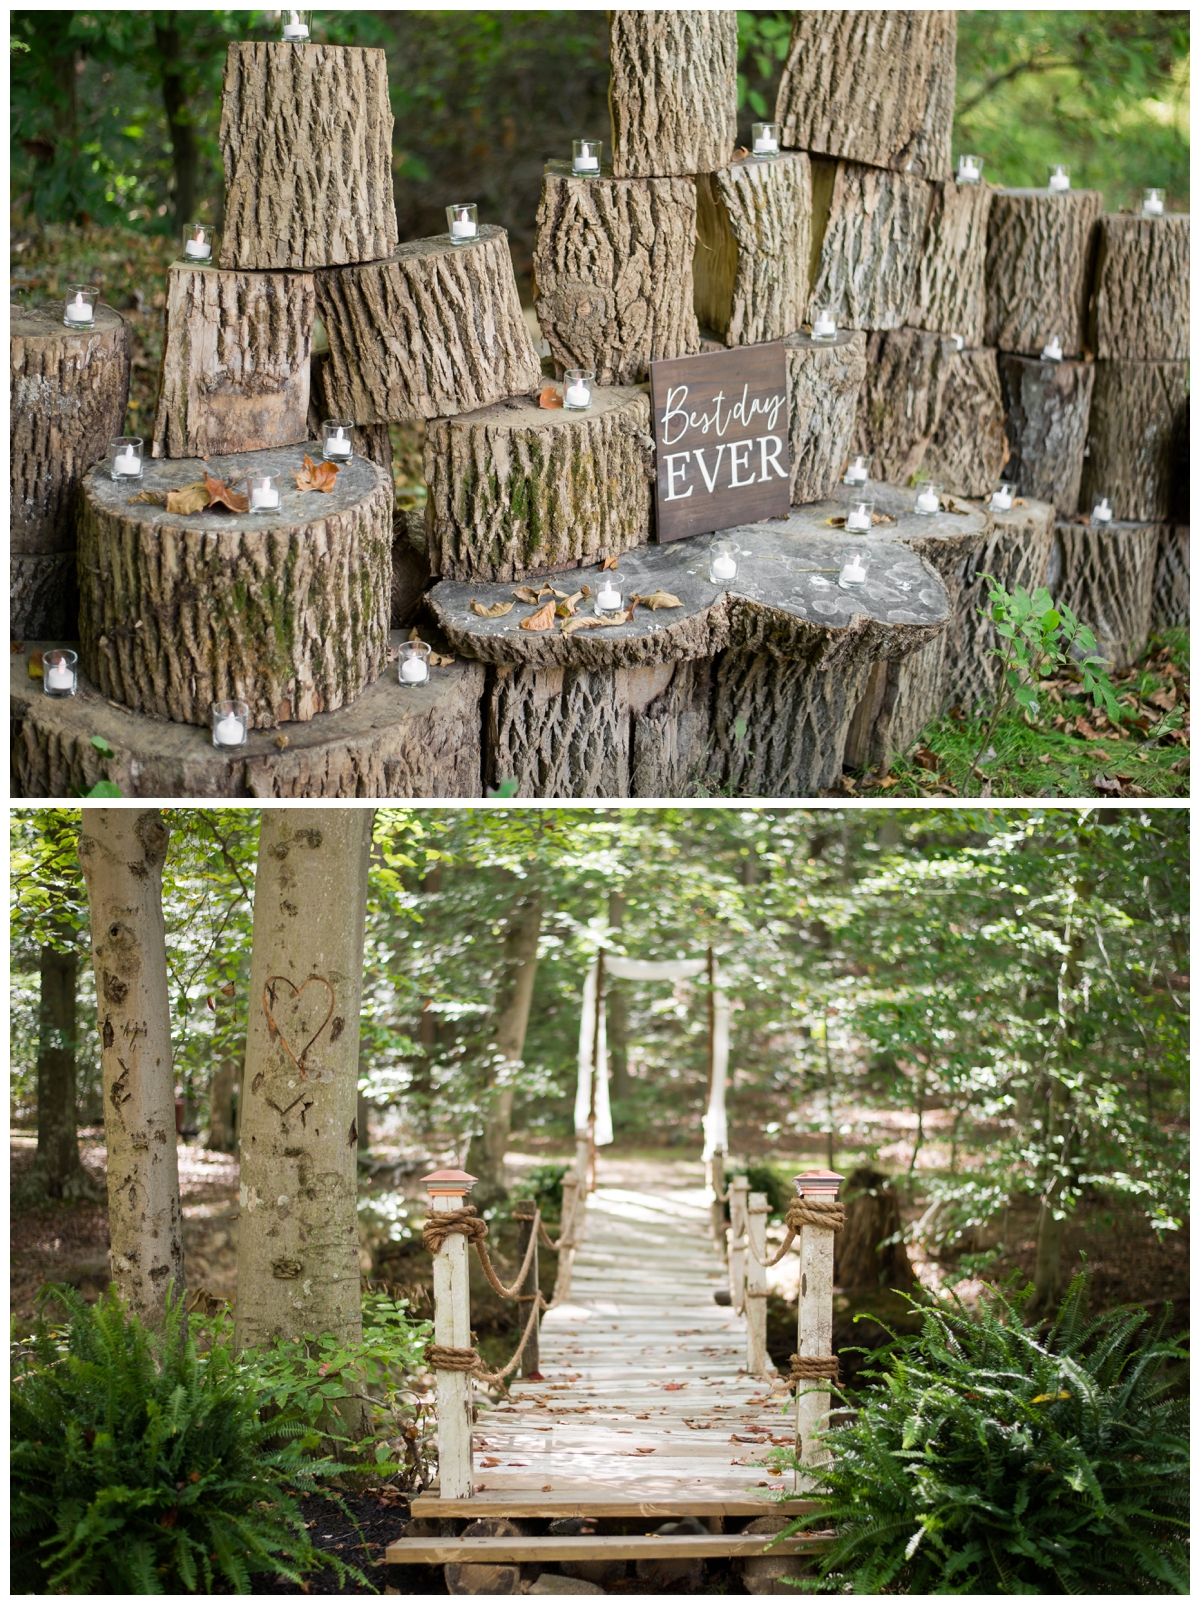 ceremony details at a shabby chic outdoor rustic wedding in the woods